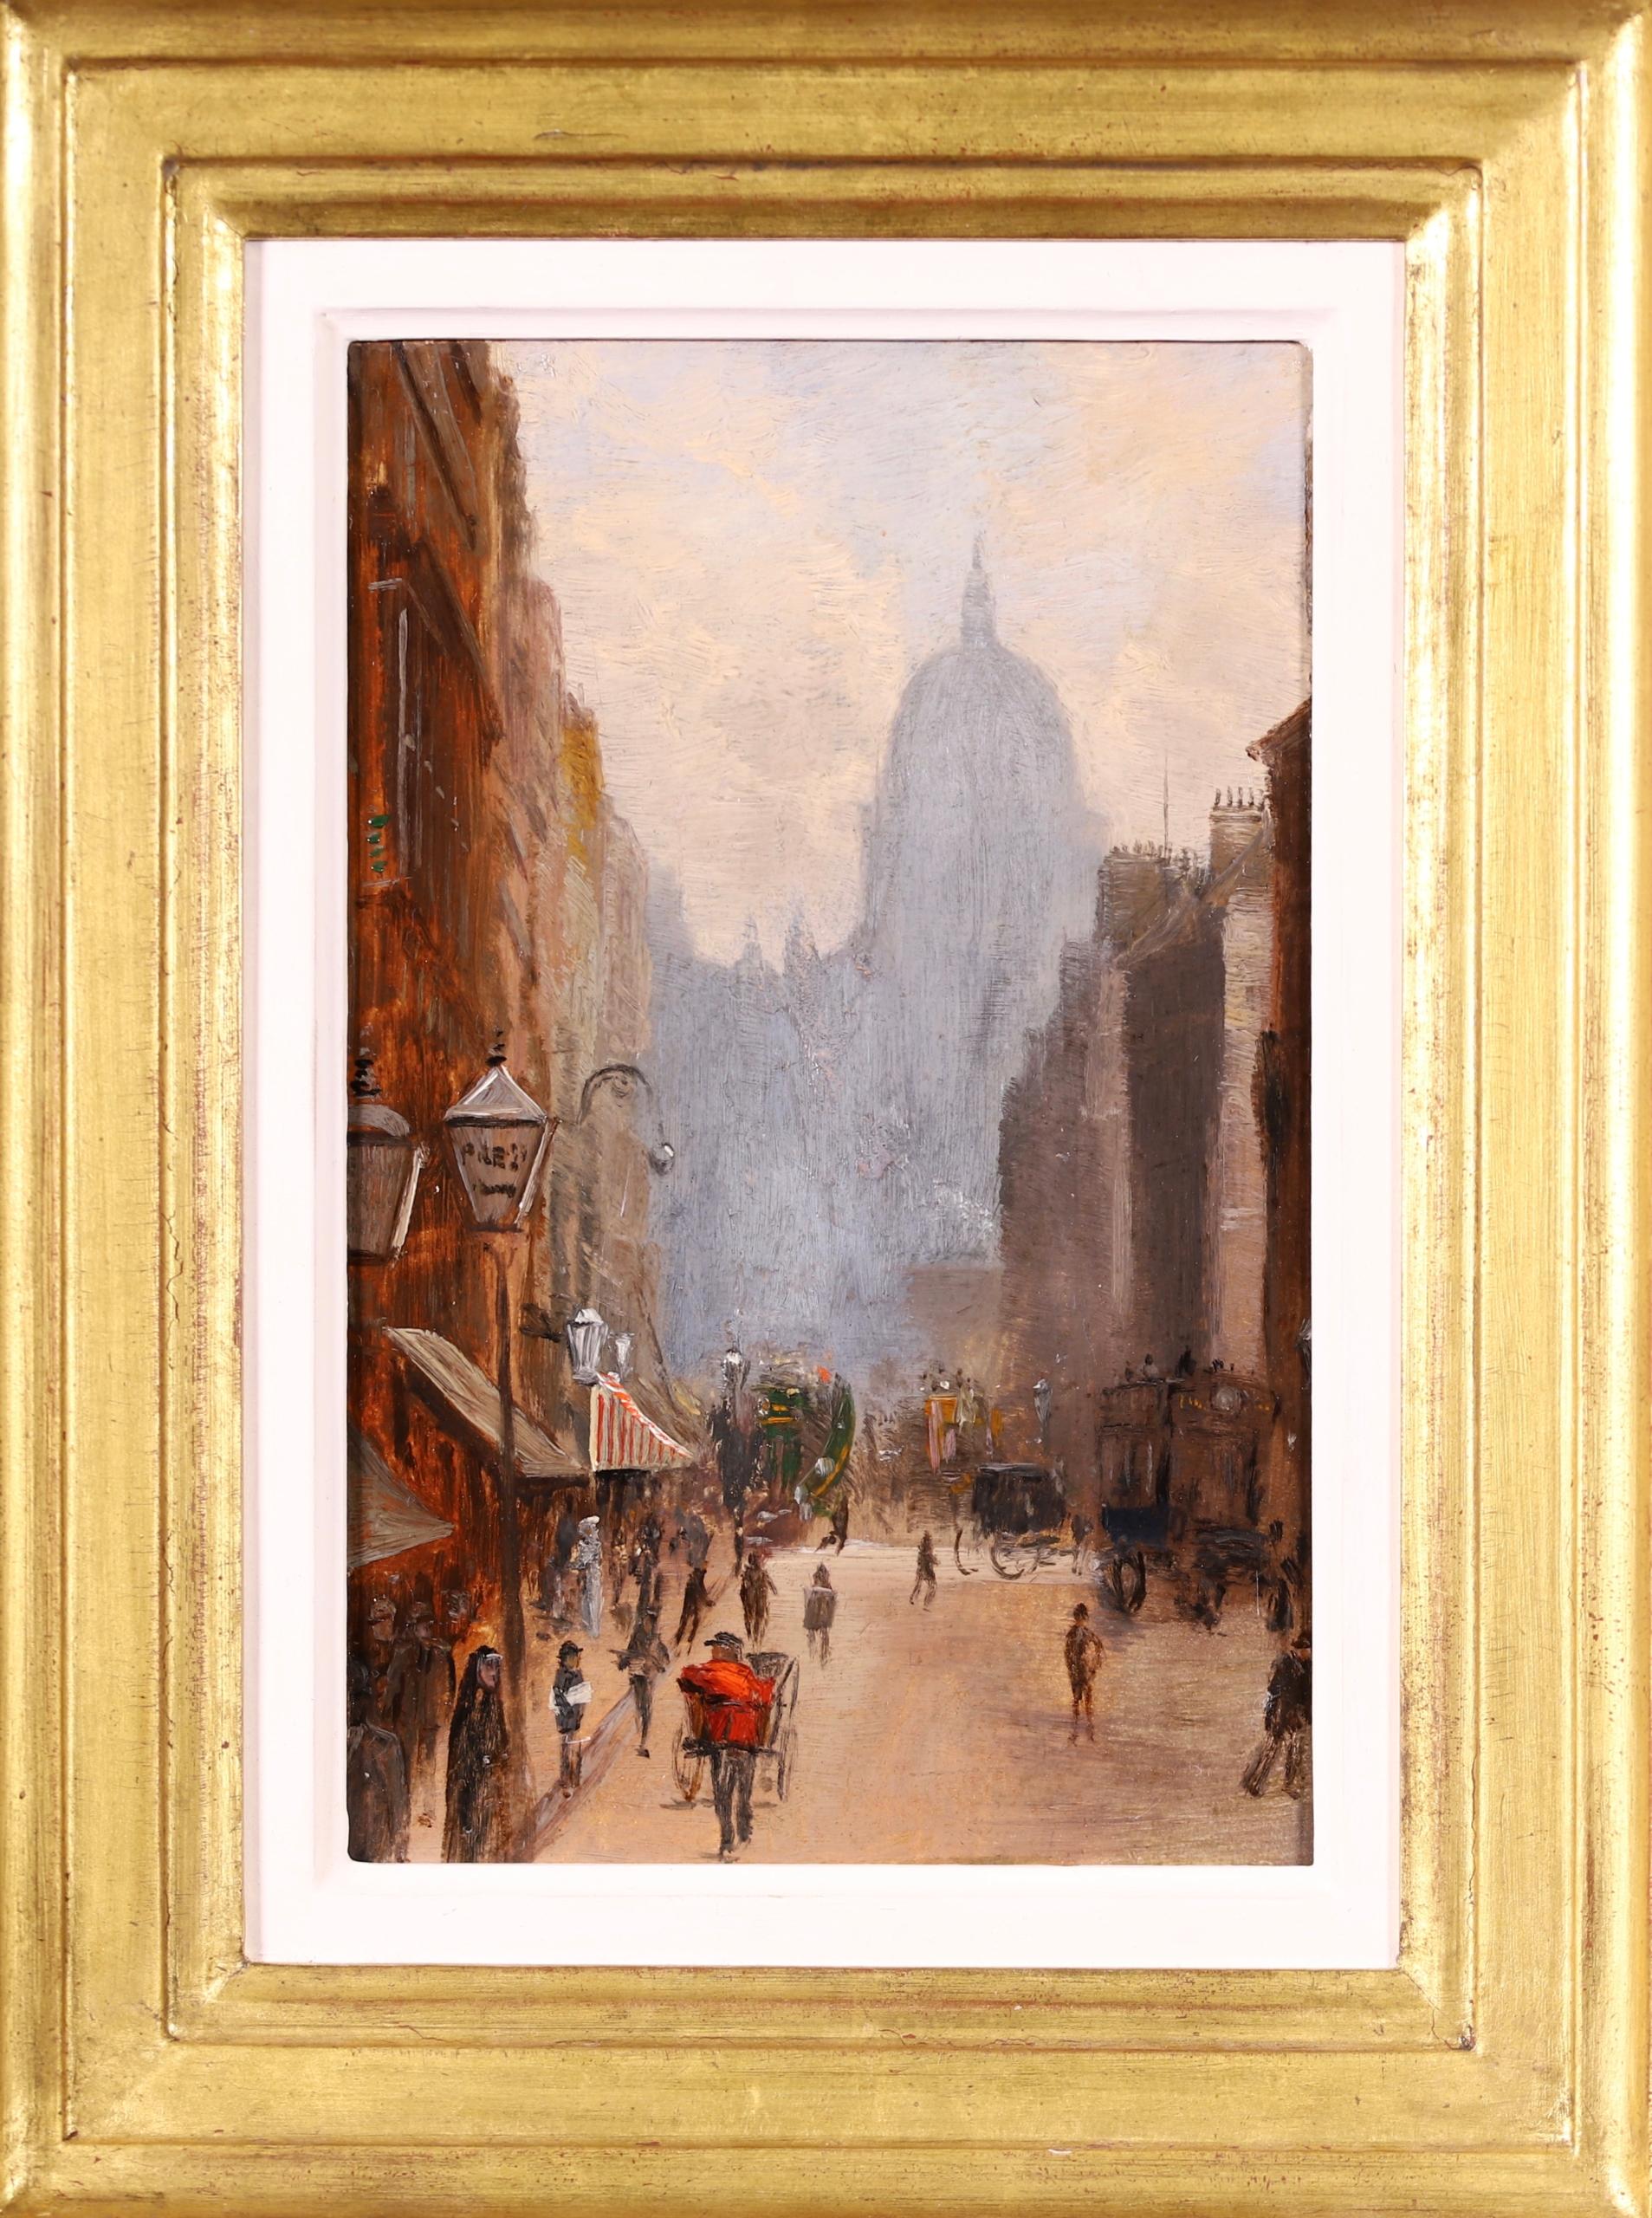 A charming oil on board circa 1890 by English impressionist painter George Hyde Pownall depicting Fleet Street in the City of London. The street is bustling with pedestrians and horse and carts. A wonderfully painted daytime